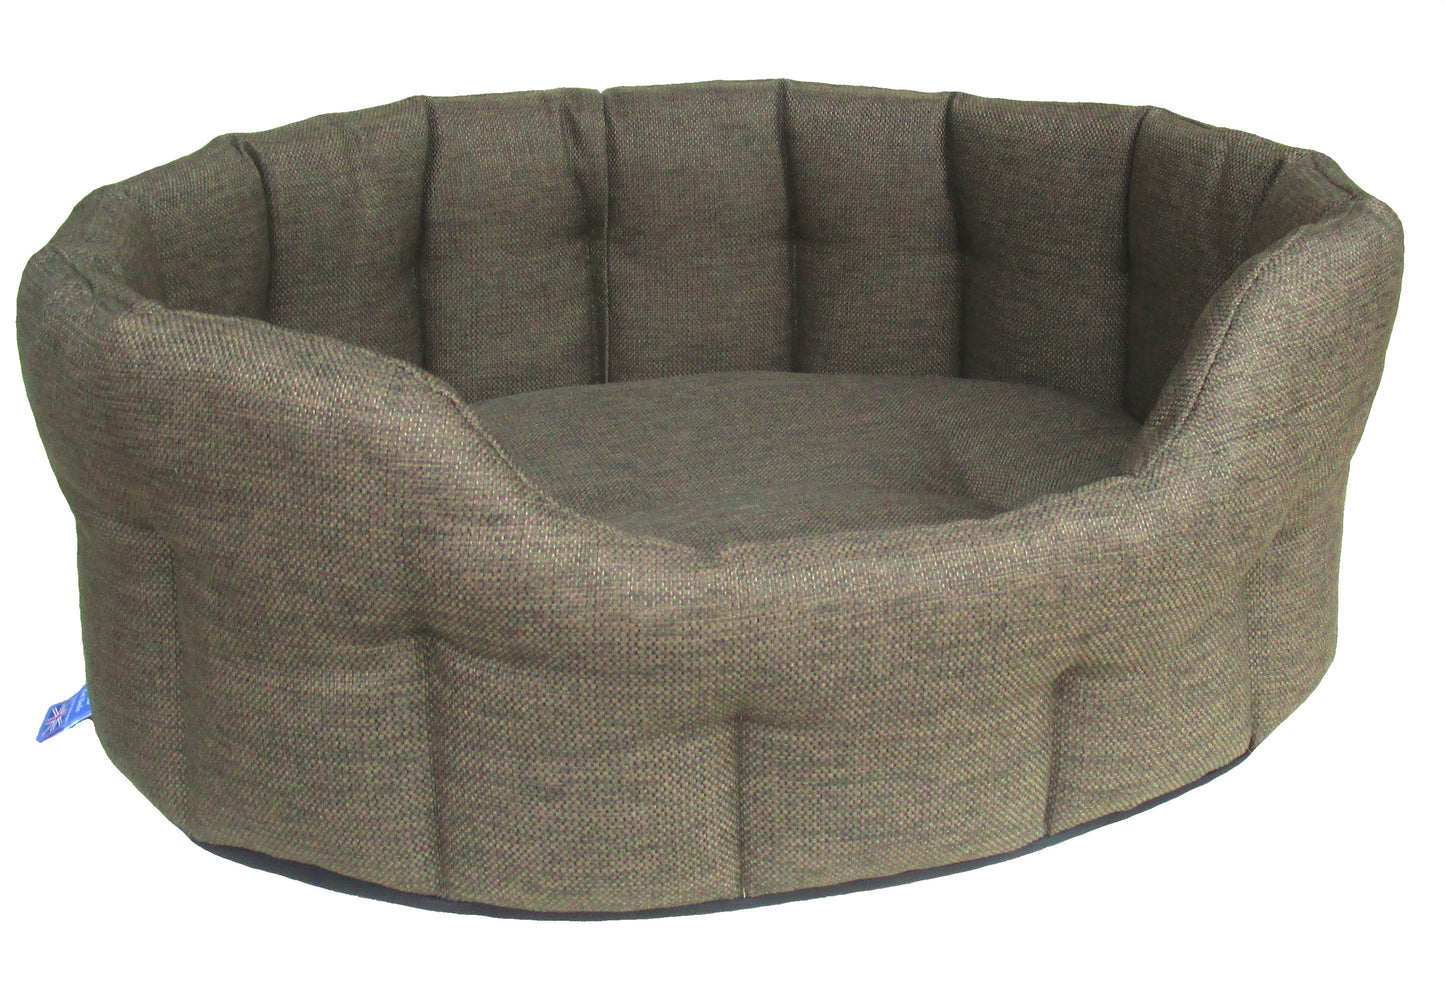 P&L Premium Oval Drop Fronted Heavy Duty Basket Weave Softee Beds